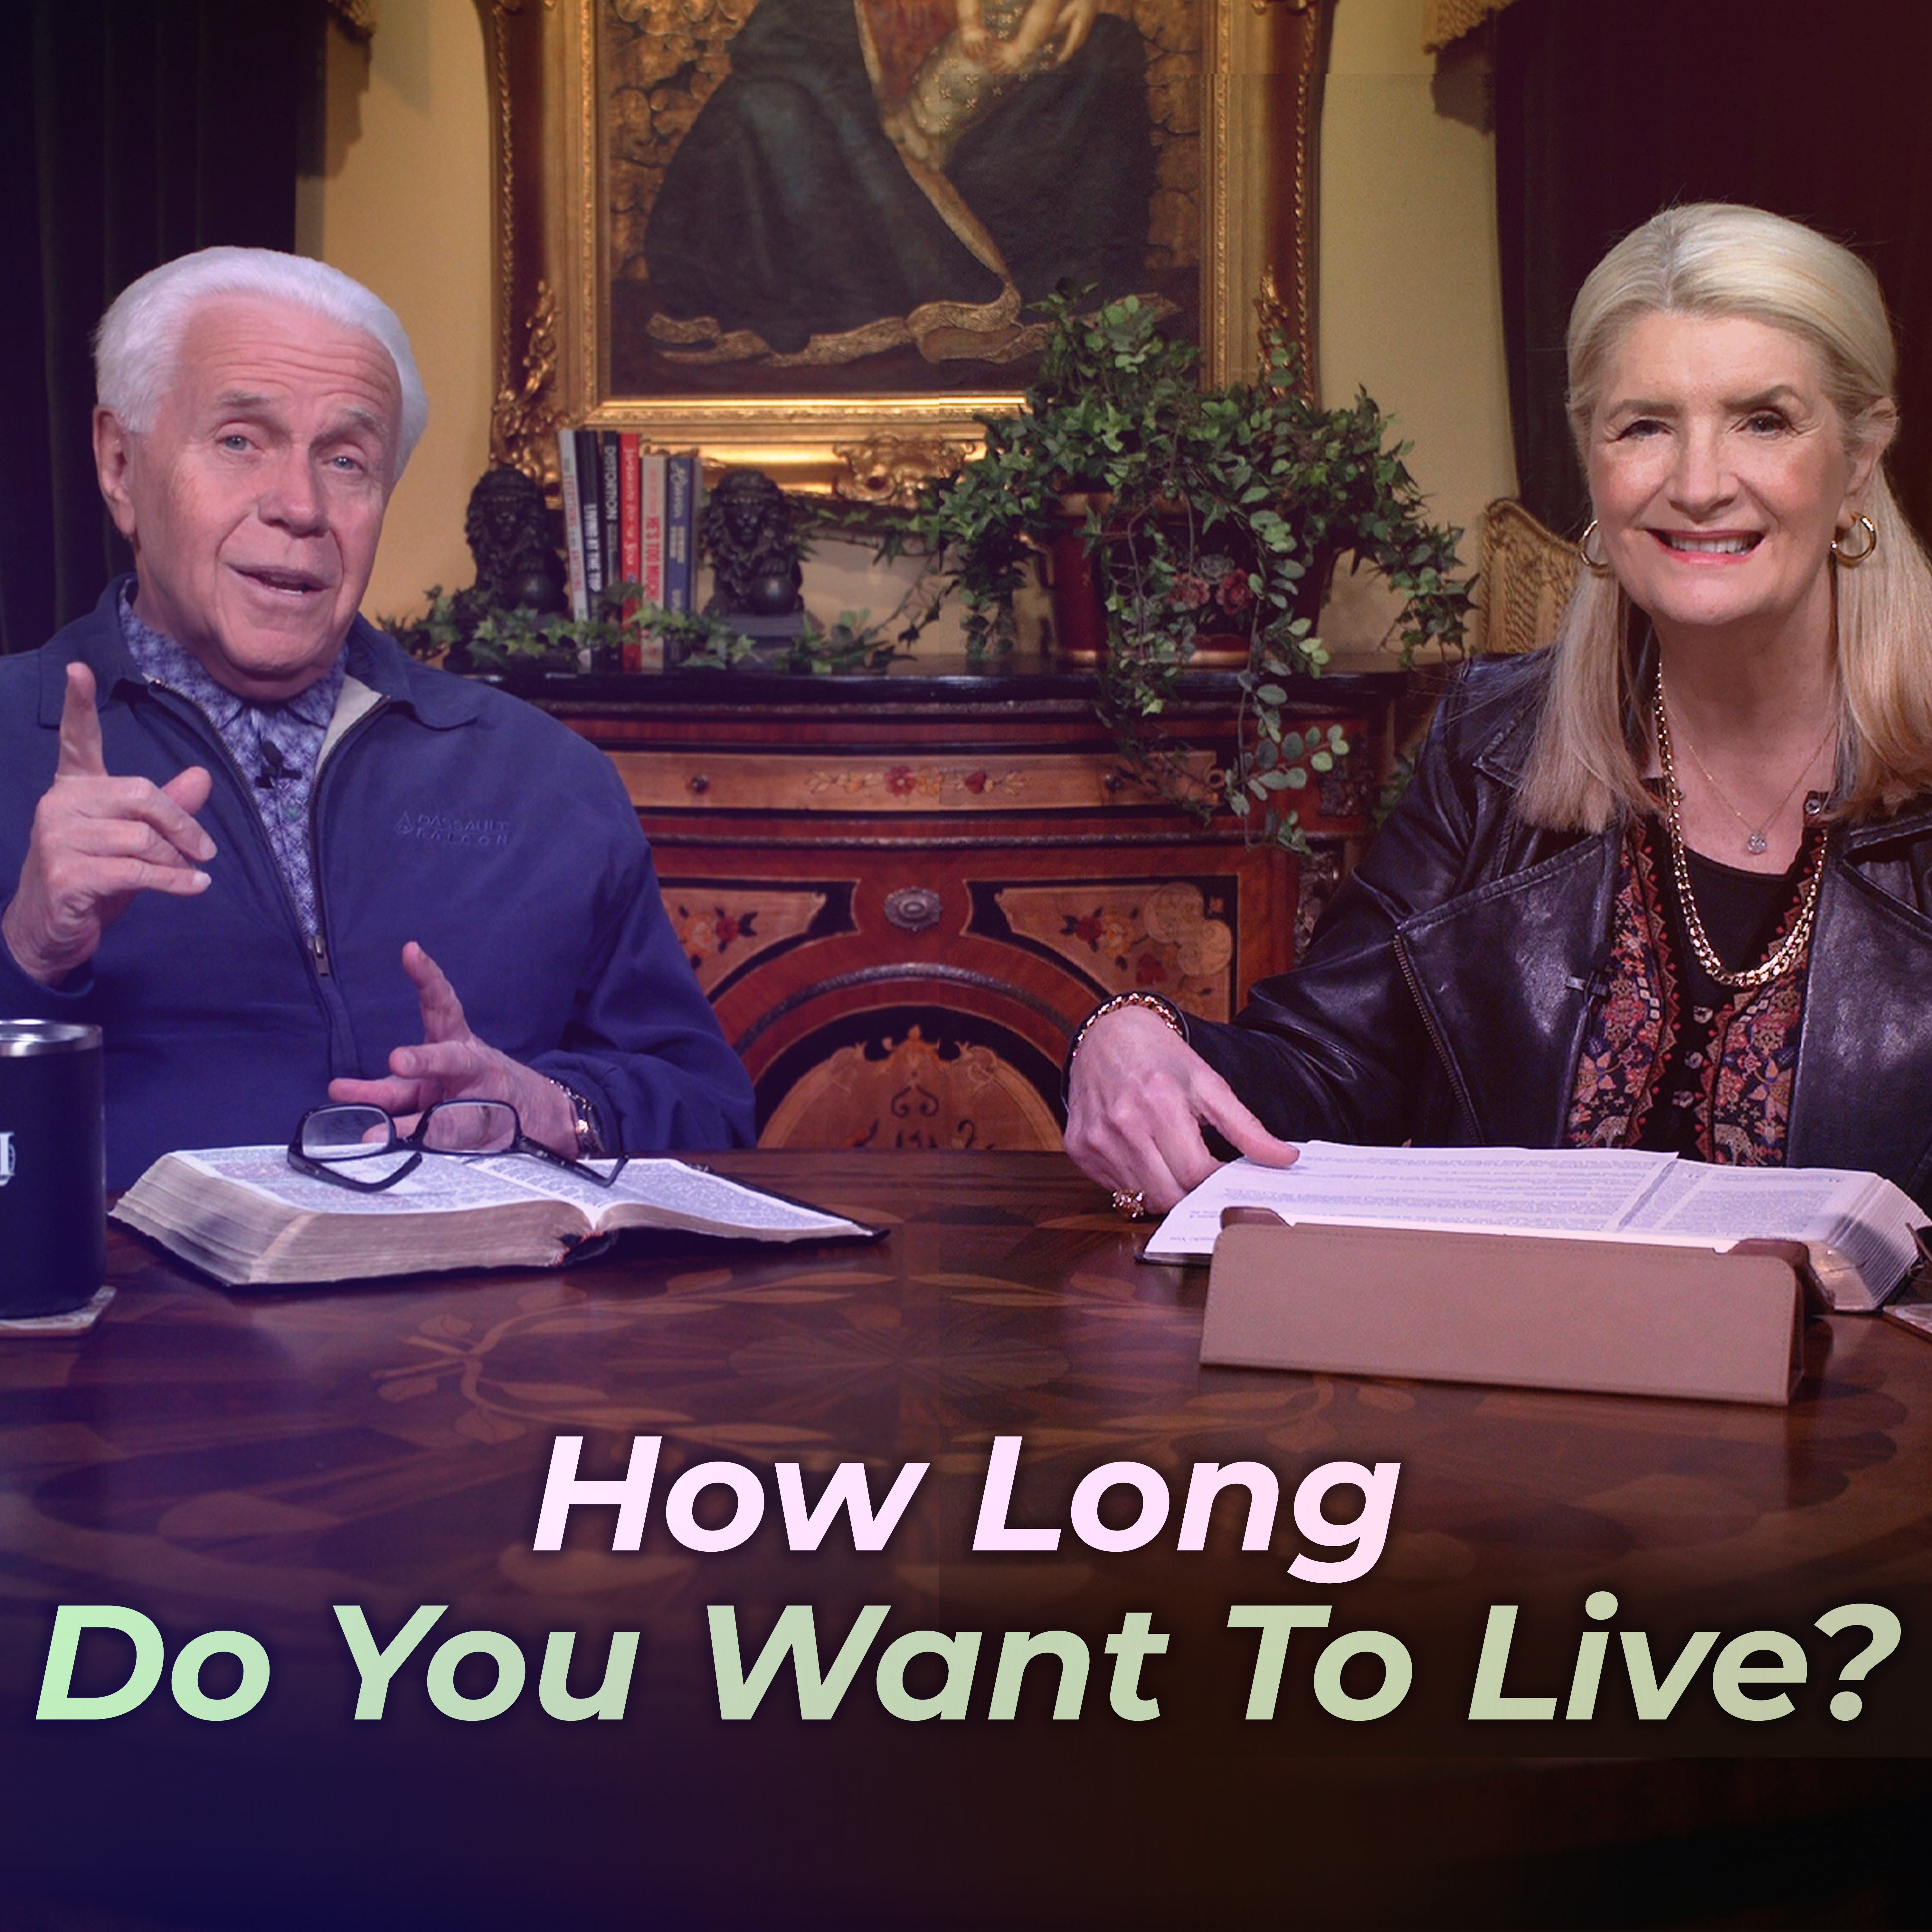 How Long Do You Want To Live?